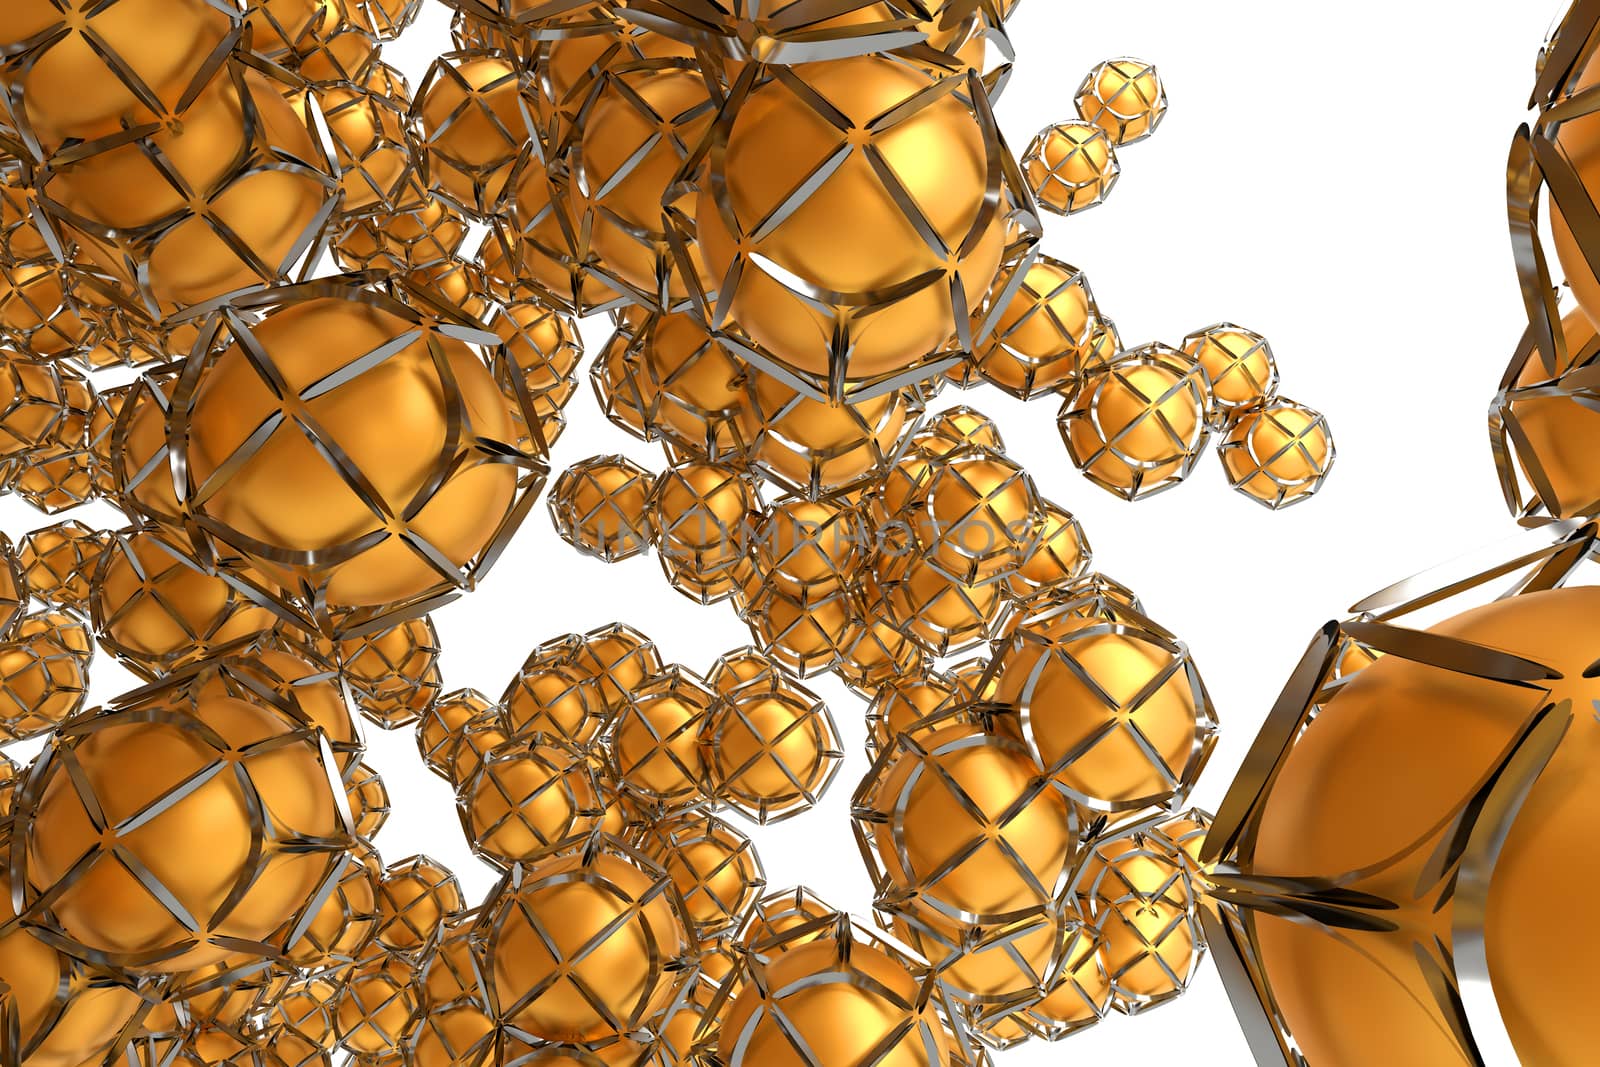 Metal spheres in a frame shell by cherezoff